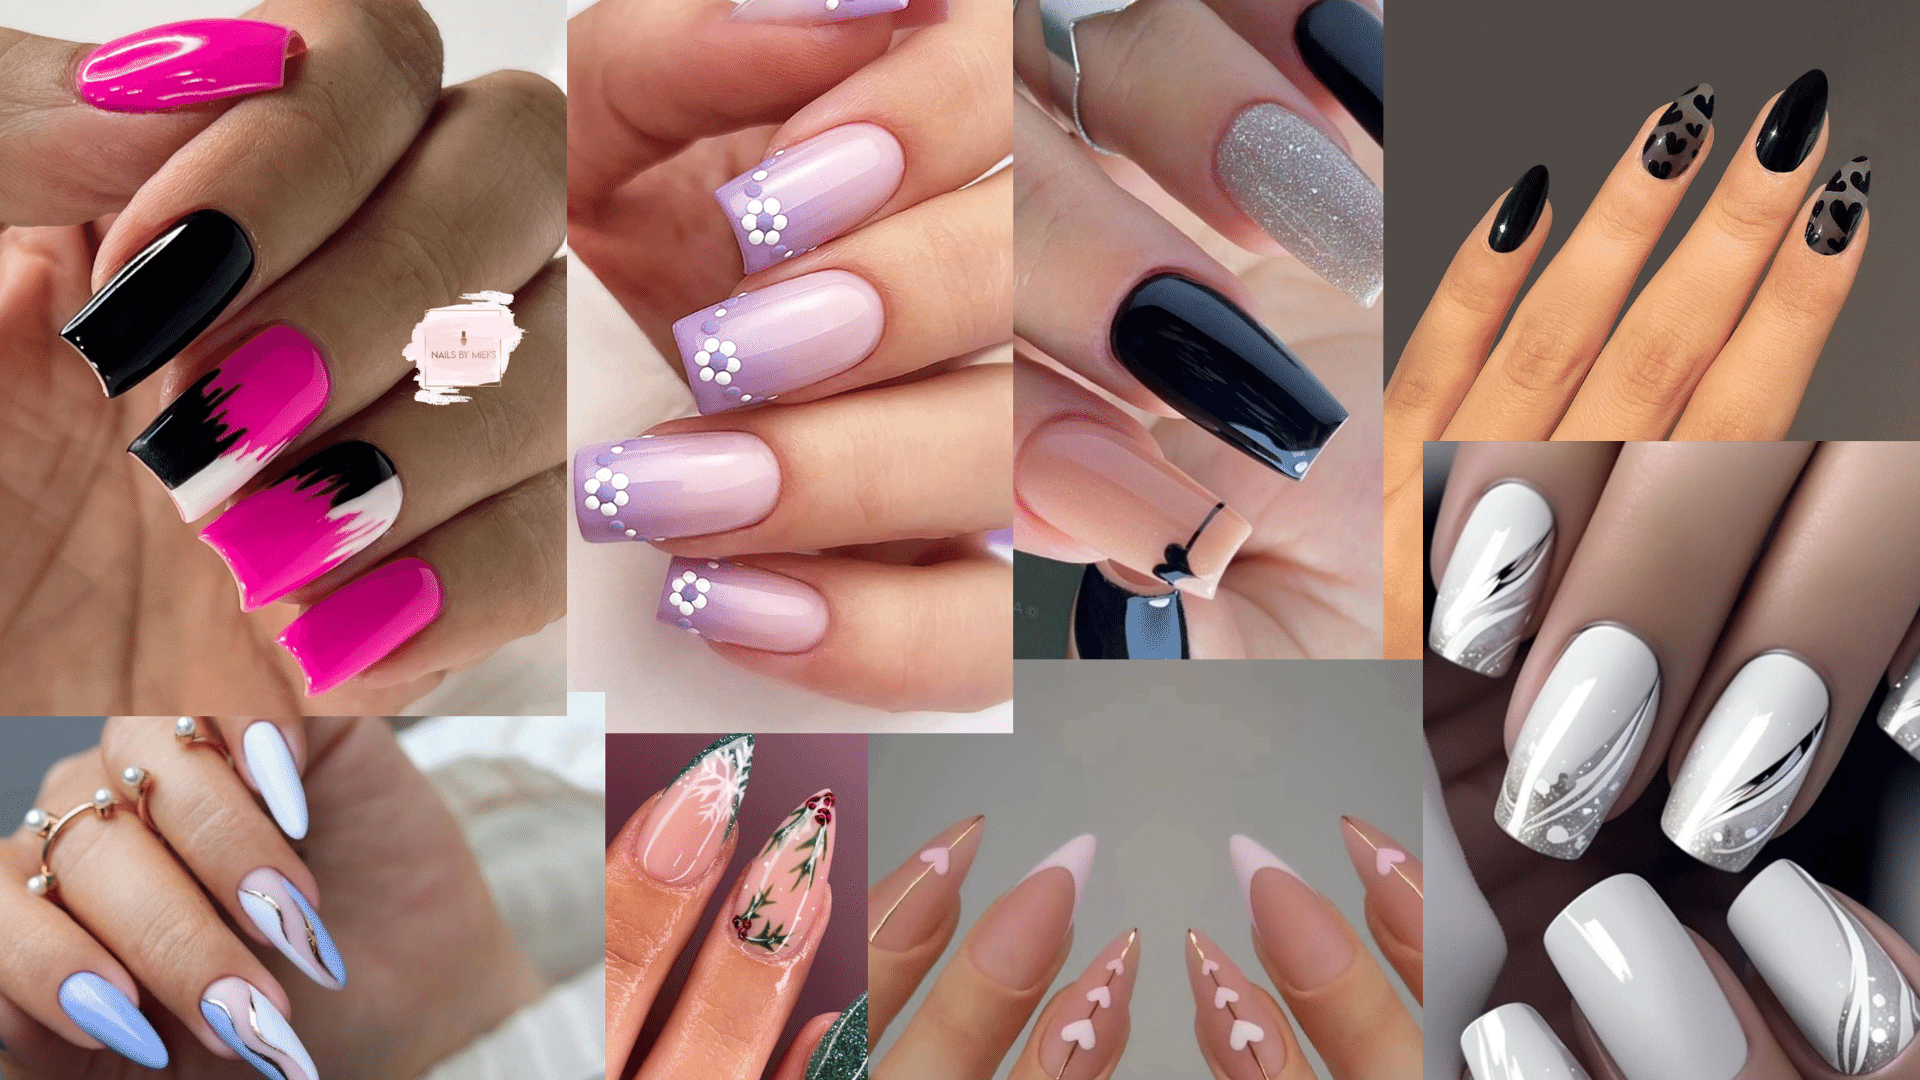 +187 Acrylic Nail Designs That Will Make Your Nails Pop